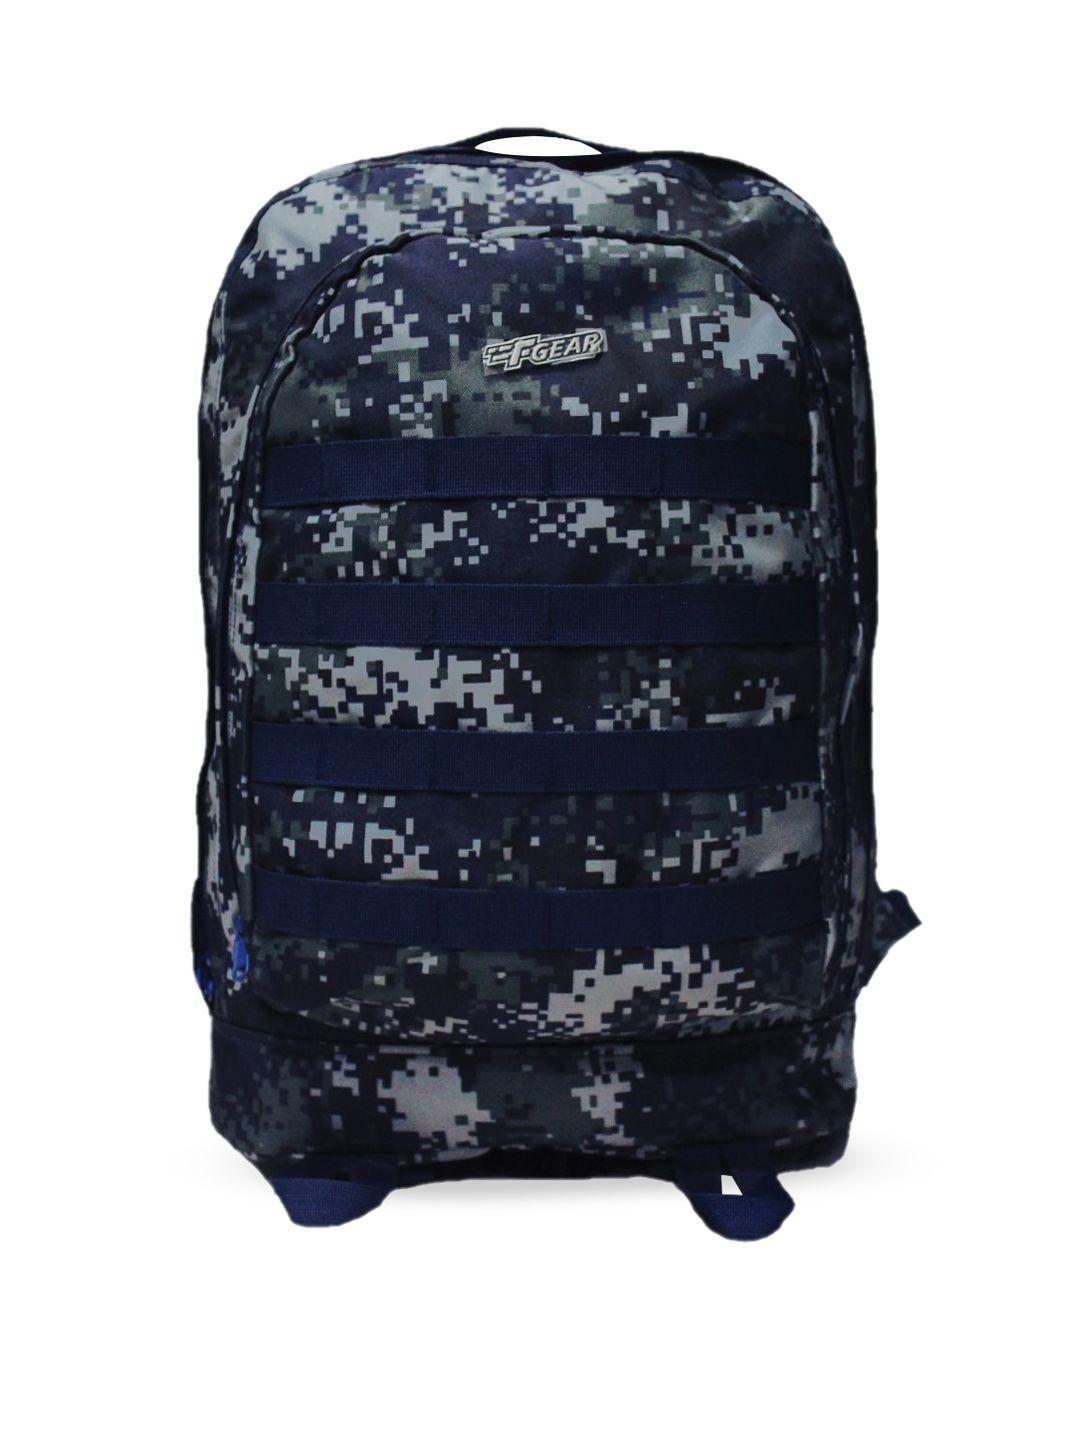 f gear unisex navy blue camouflage backpack